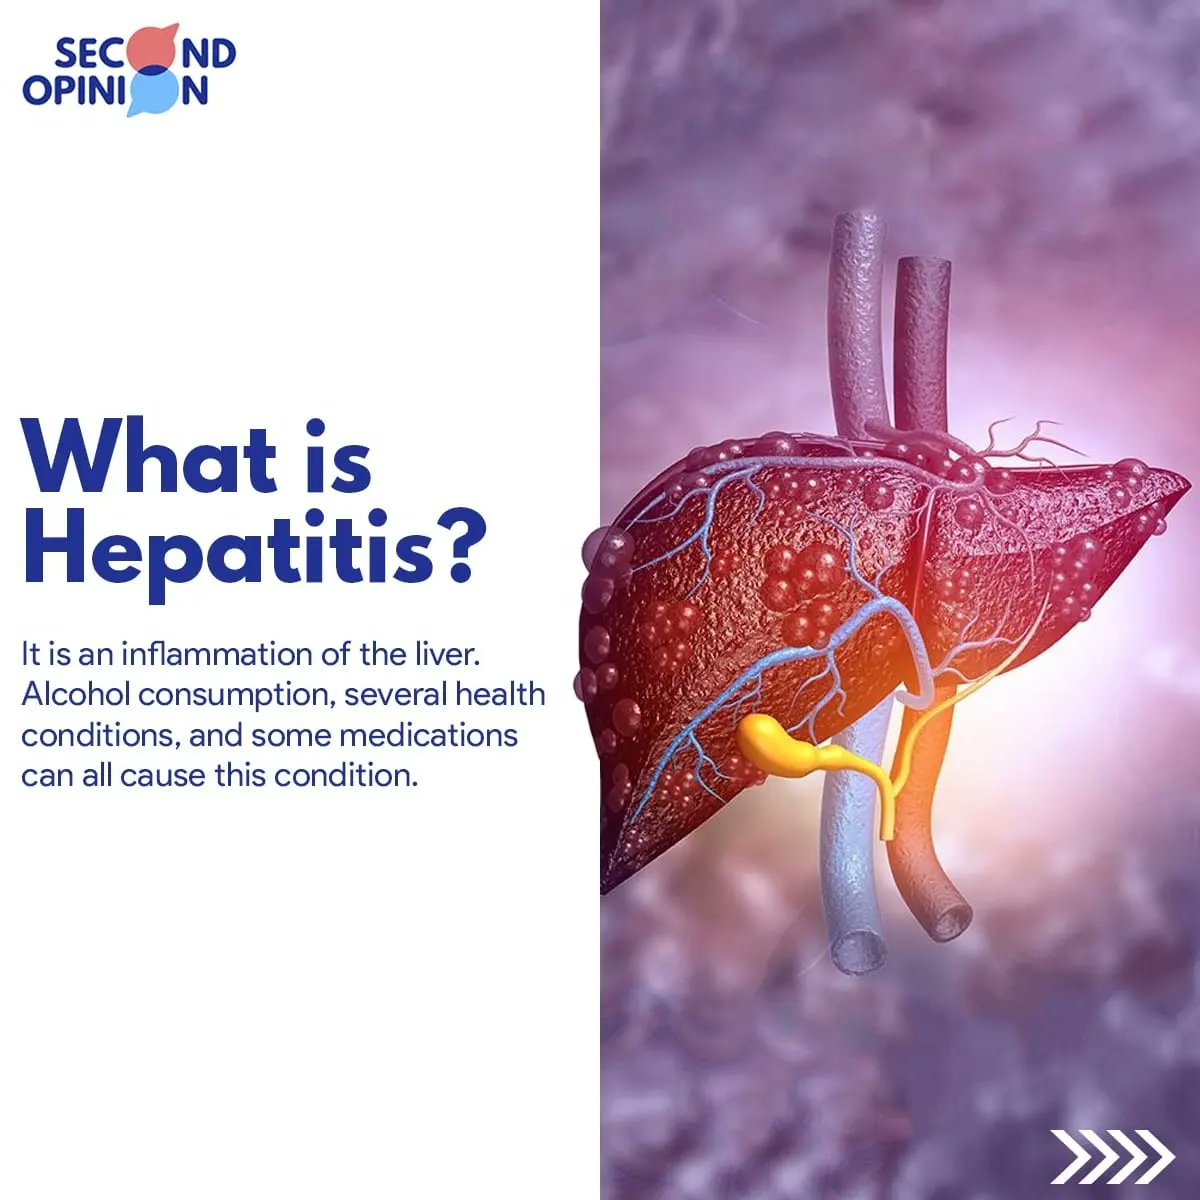 2ndOpinion__: Hepatitis means inflammation of the liver.The liver is a vita...